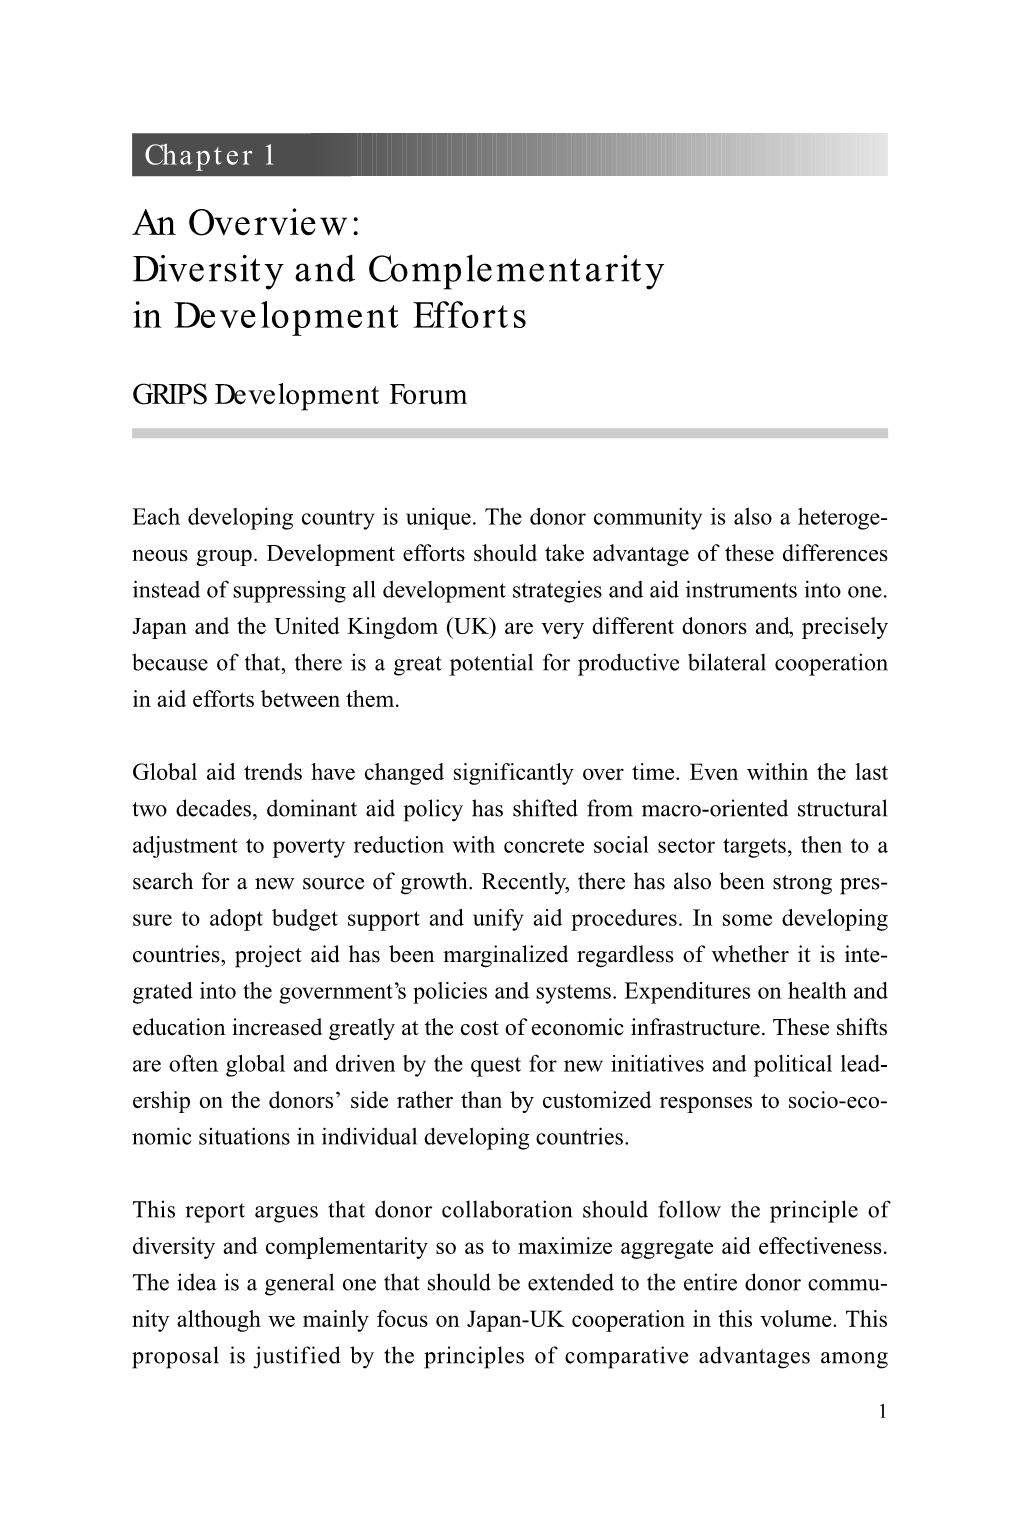 An Overview: Diversity and Complementarity in Development Efforts